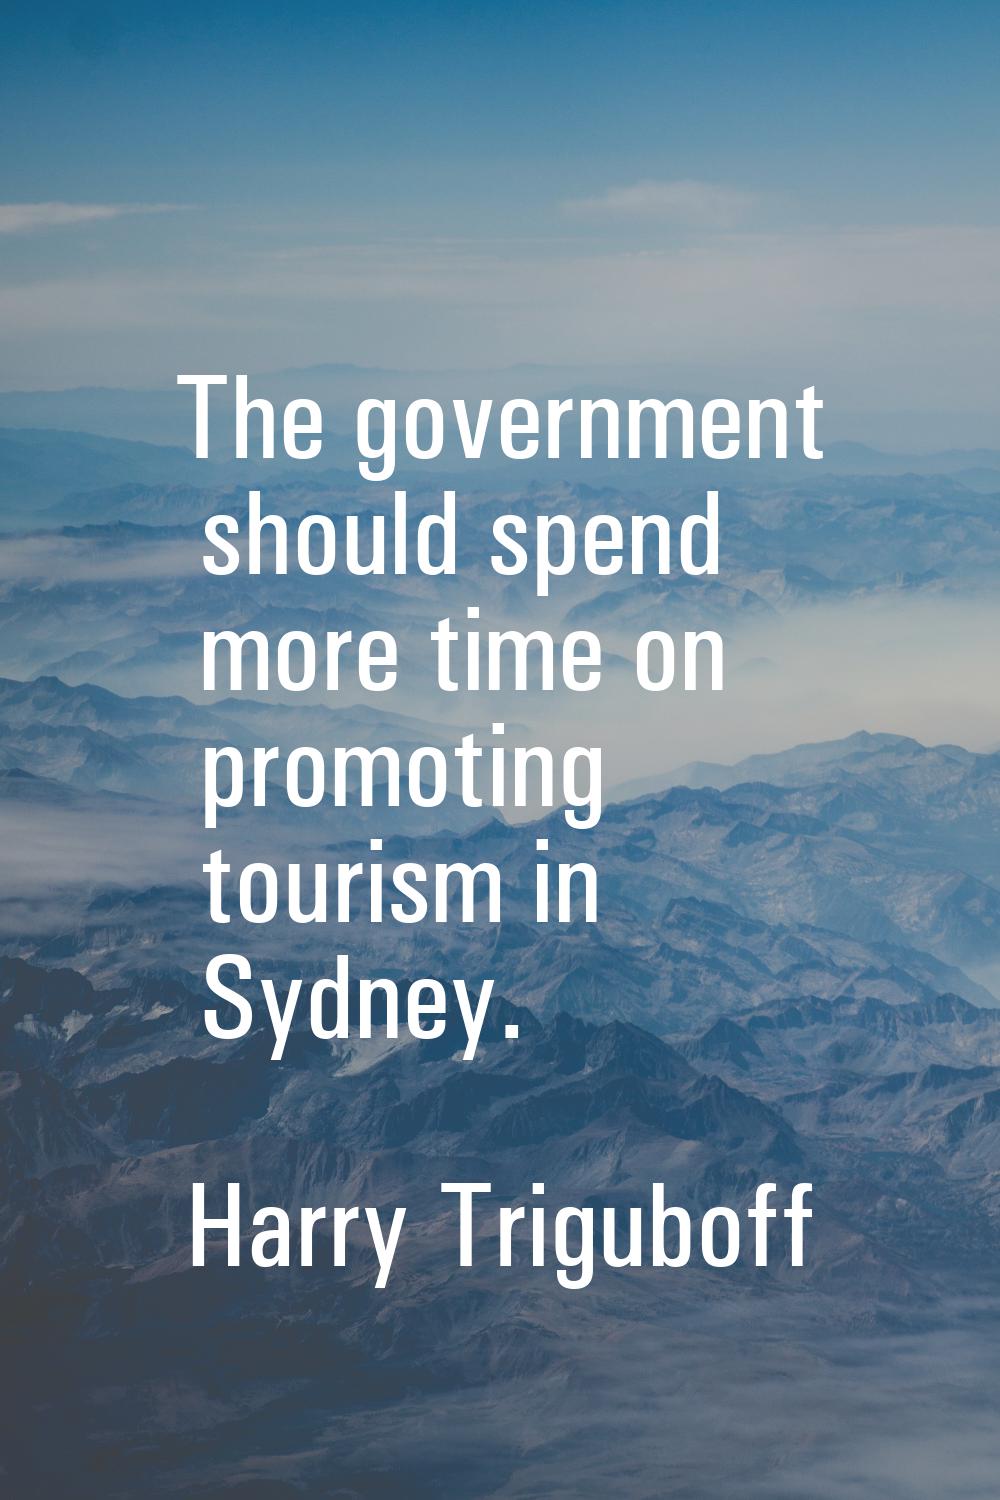 The government should spend more time on promoting tourism in Sydney.